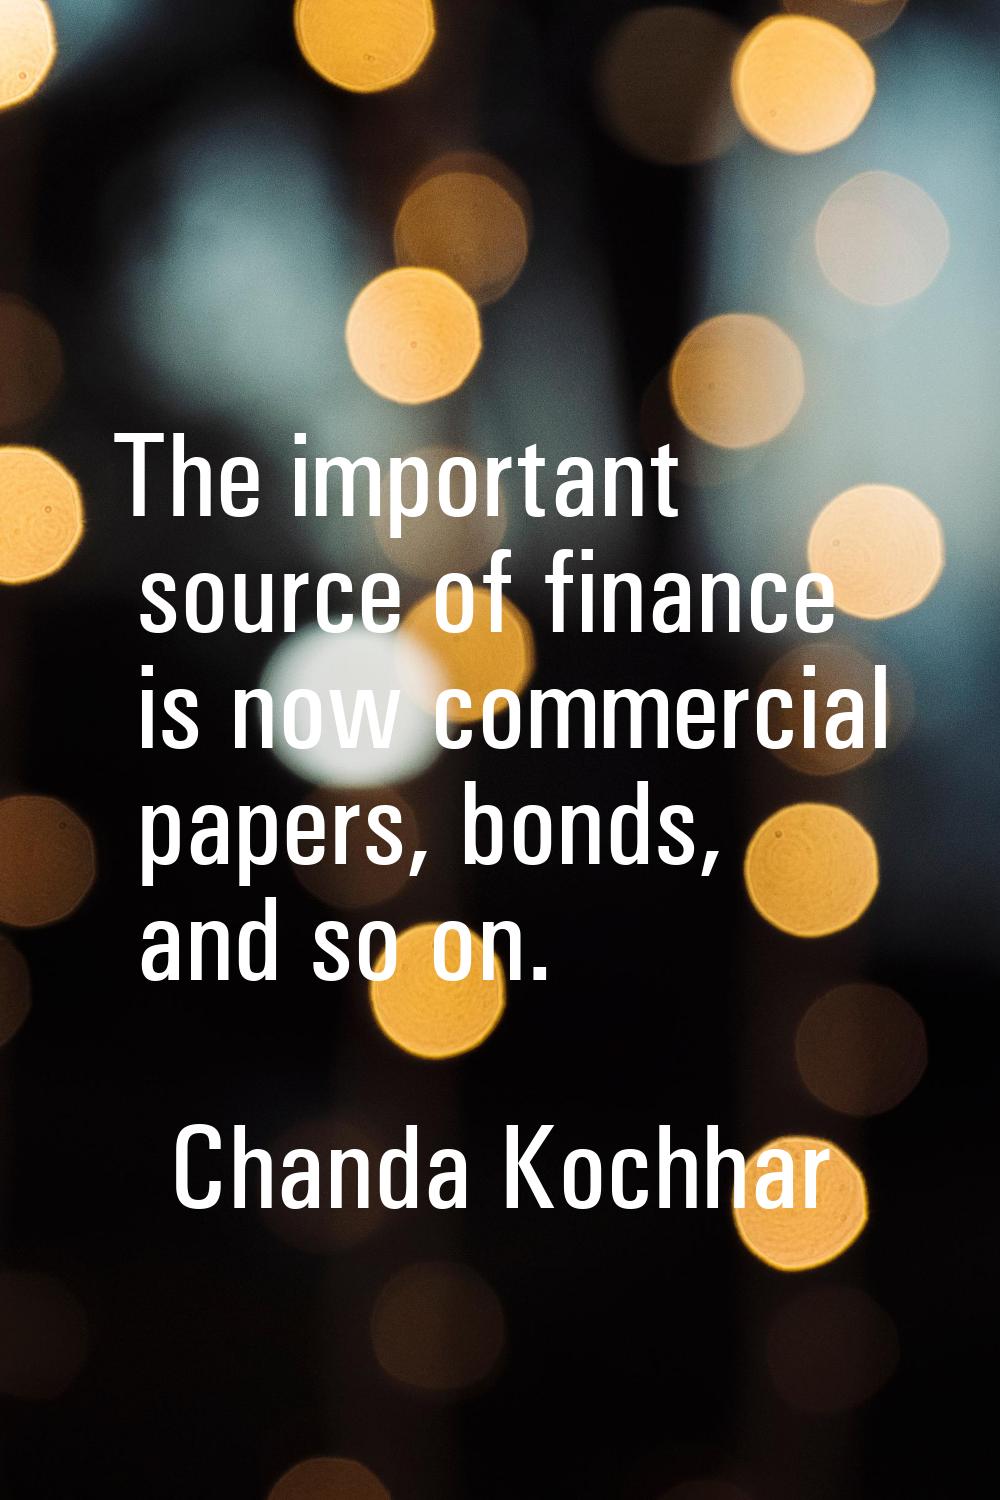 The important source of finance is now commercial papers, bonds, and so on.